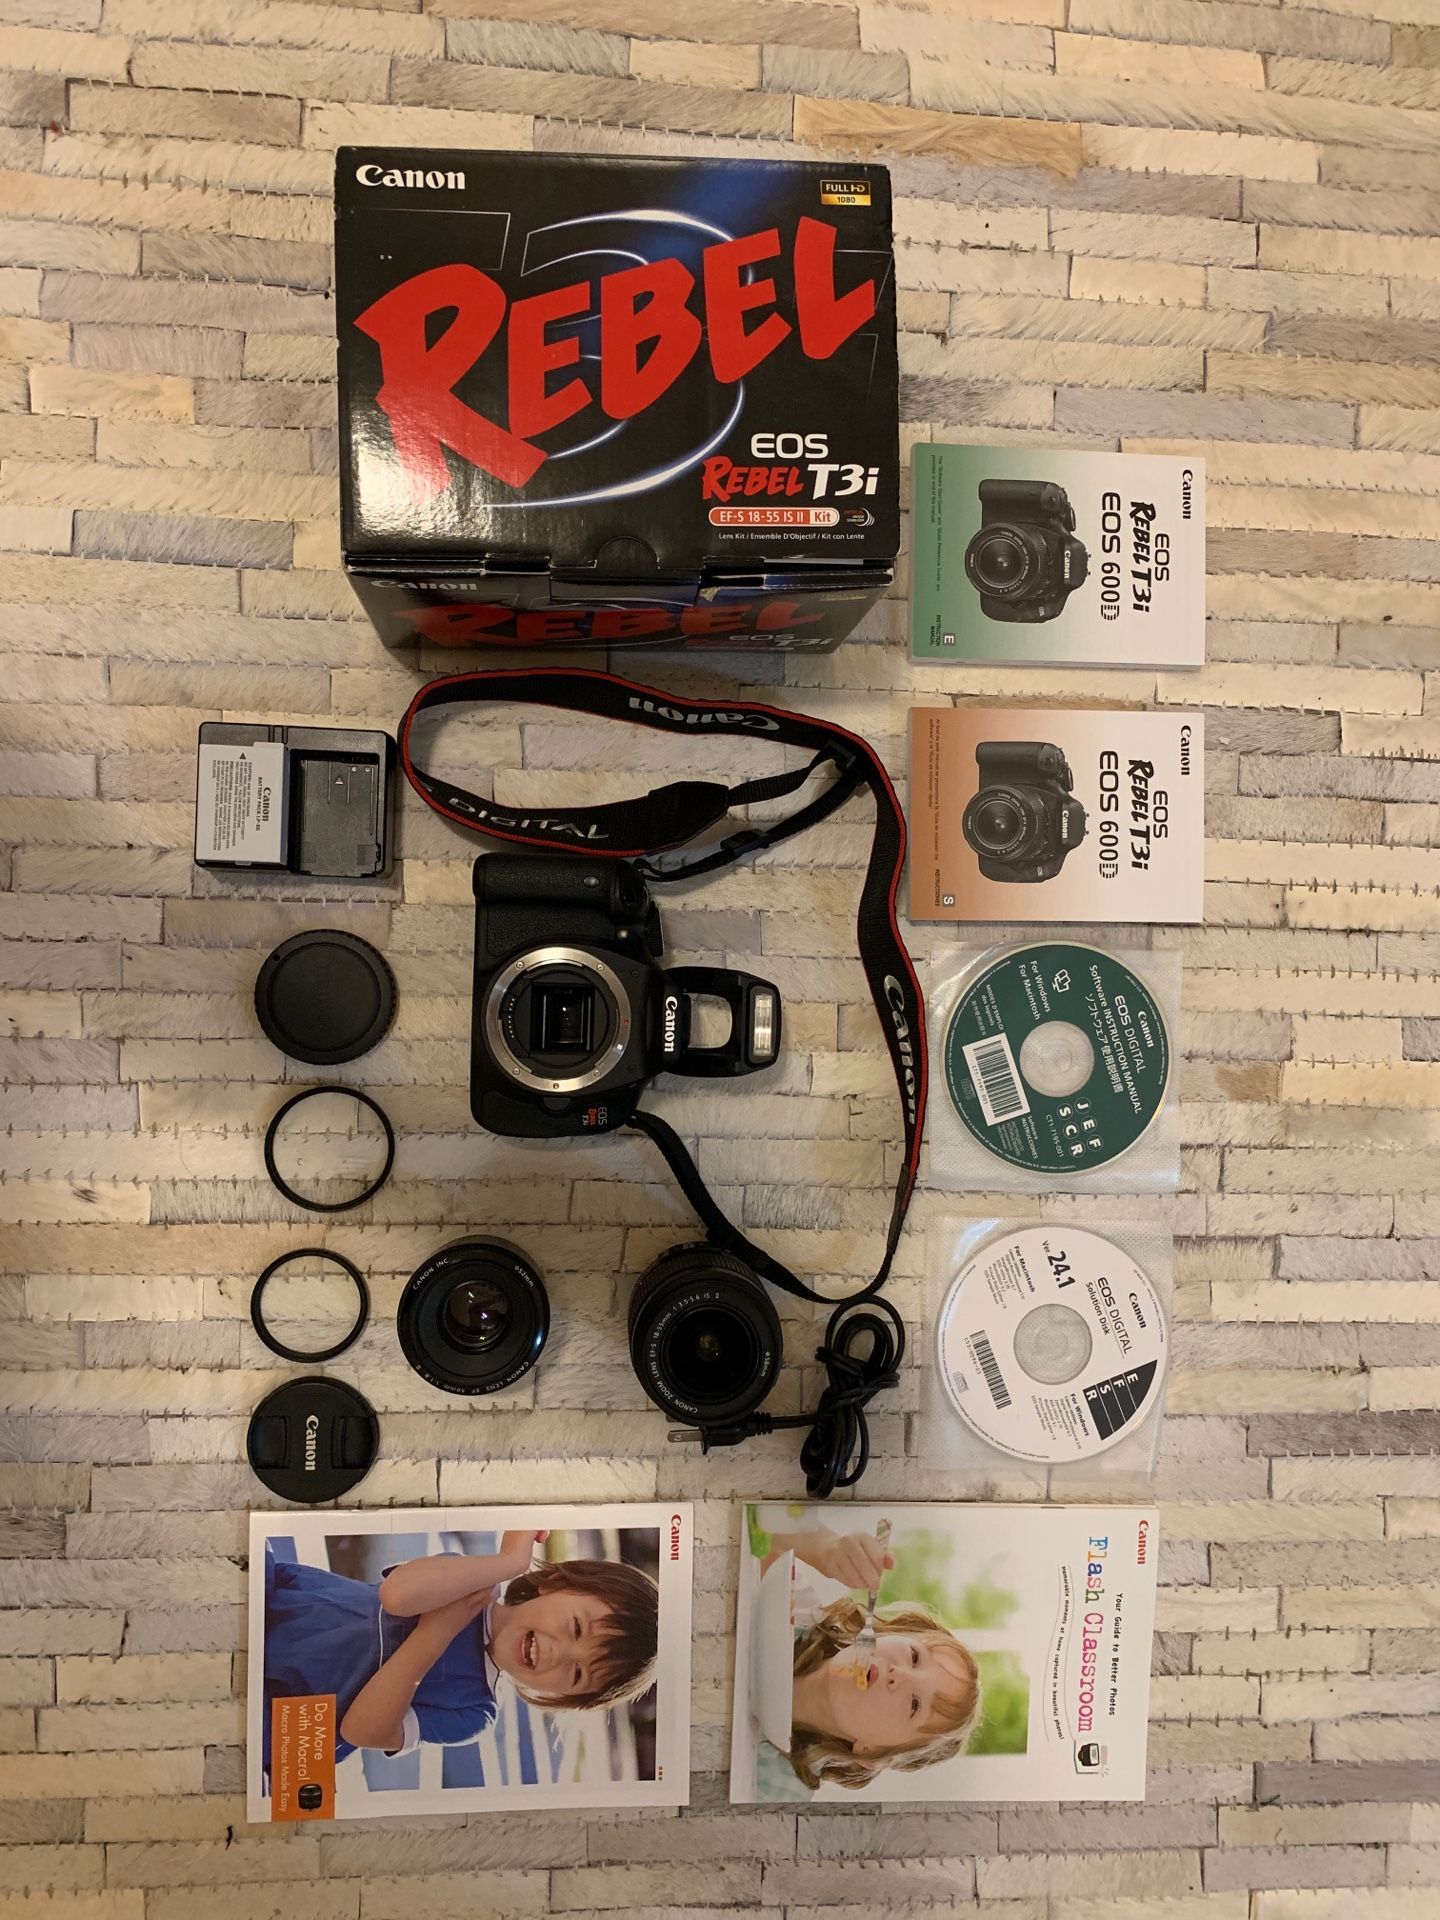 Canon Rebel T3i + 2 Lenses and Accessories